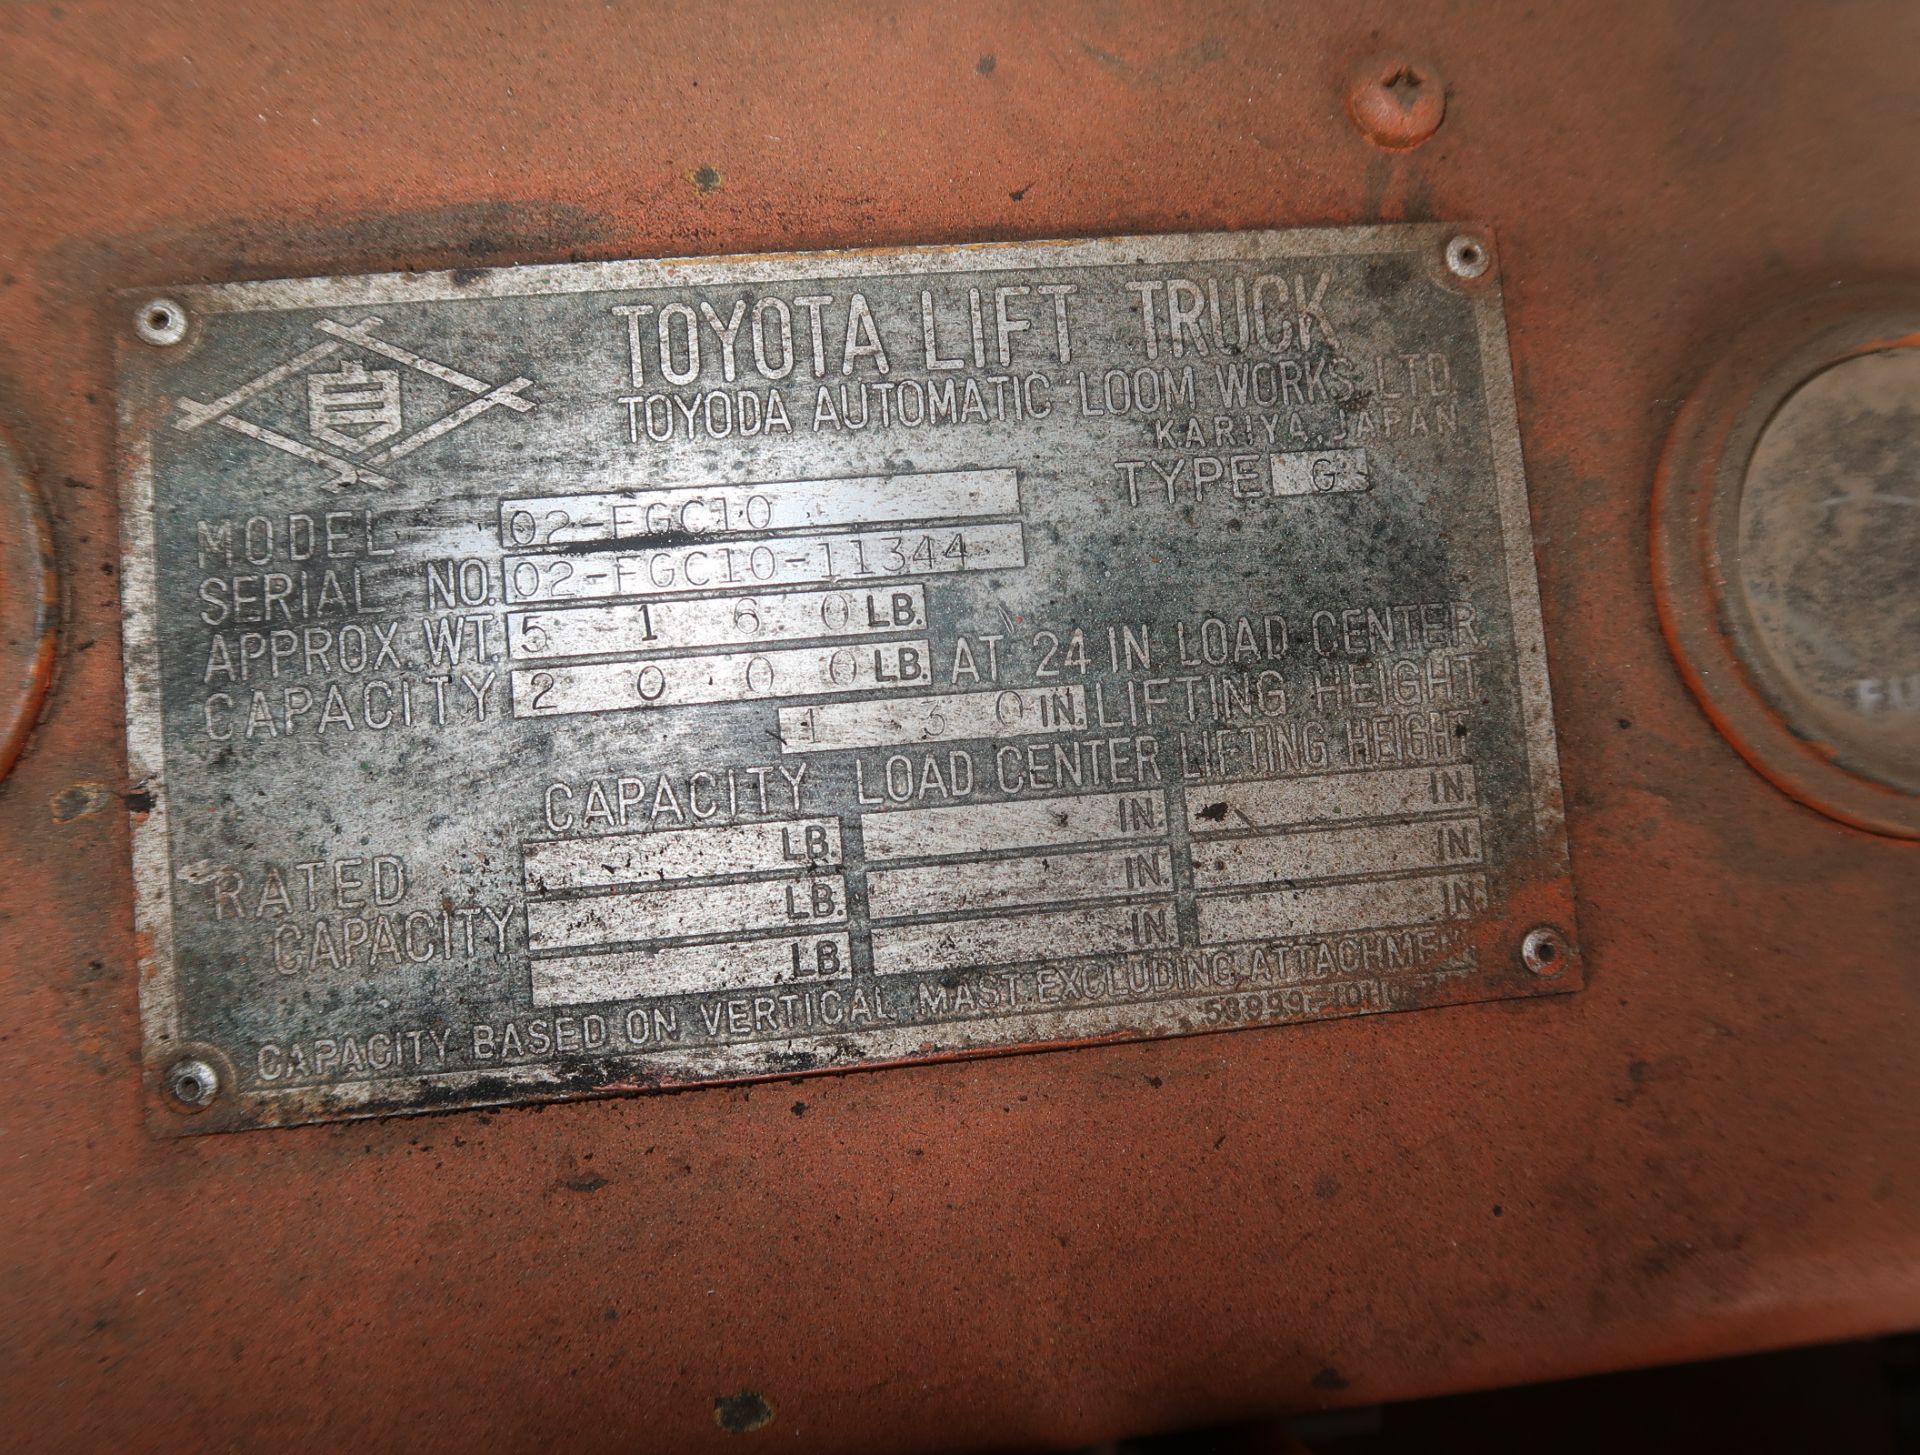 TOYOTA MDL. O2 FGC10 2000# FORKLIFT, GAS, SOLID TIRE, SN. FGC10 11344 - Image 3 of 4